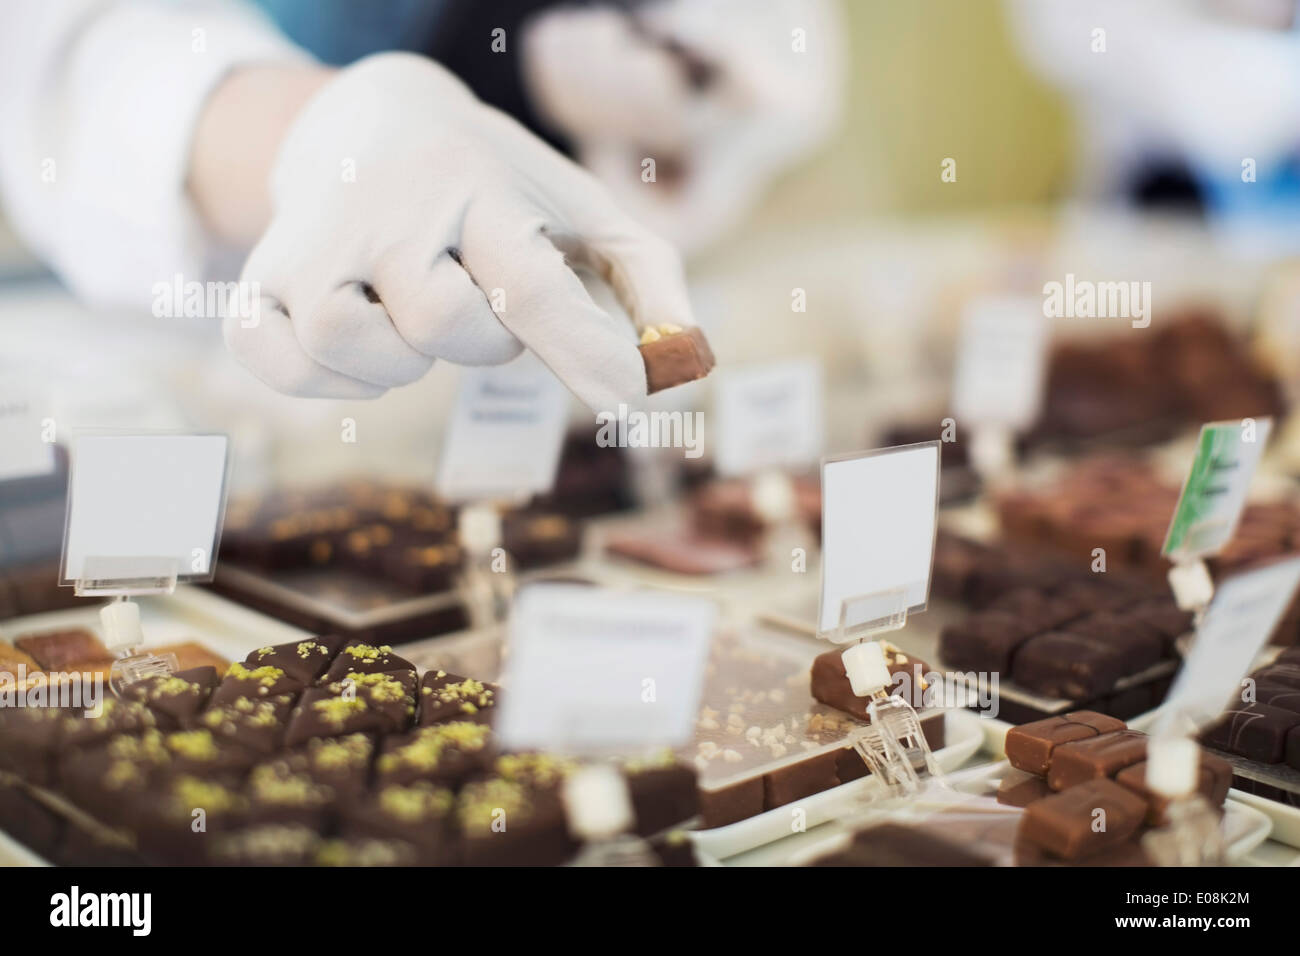 Cropped image of worker holding sweet food at display cabinet at cafe Stock Photo